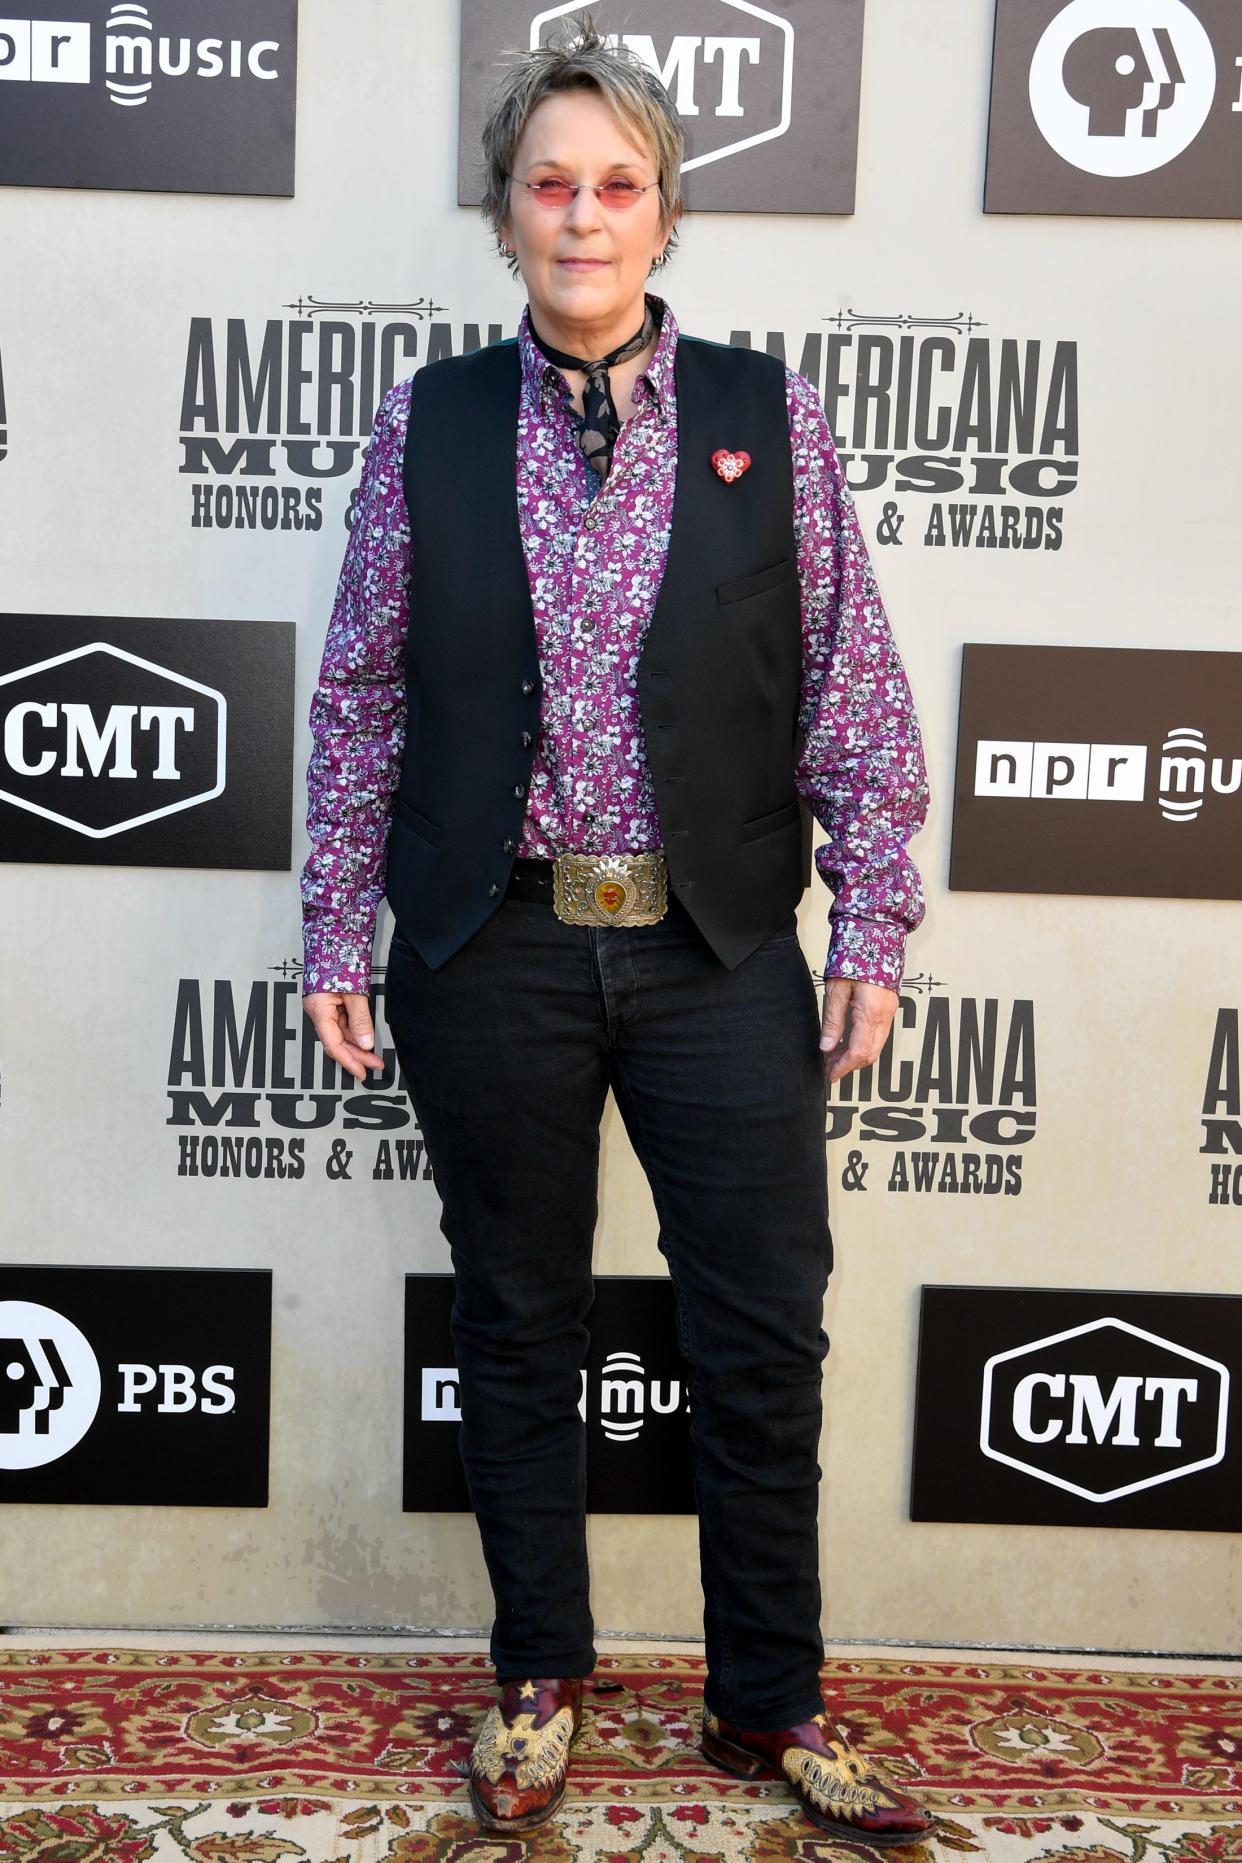 Mary Gauthier poses on the red carpet before the 2018 Americana Honors and Awards show at the Ryman Auditorium in Nashville, Tenn., Wednesday, Sept. 12, 2018.